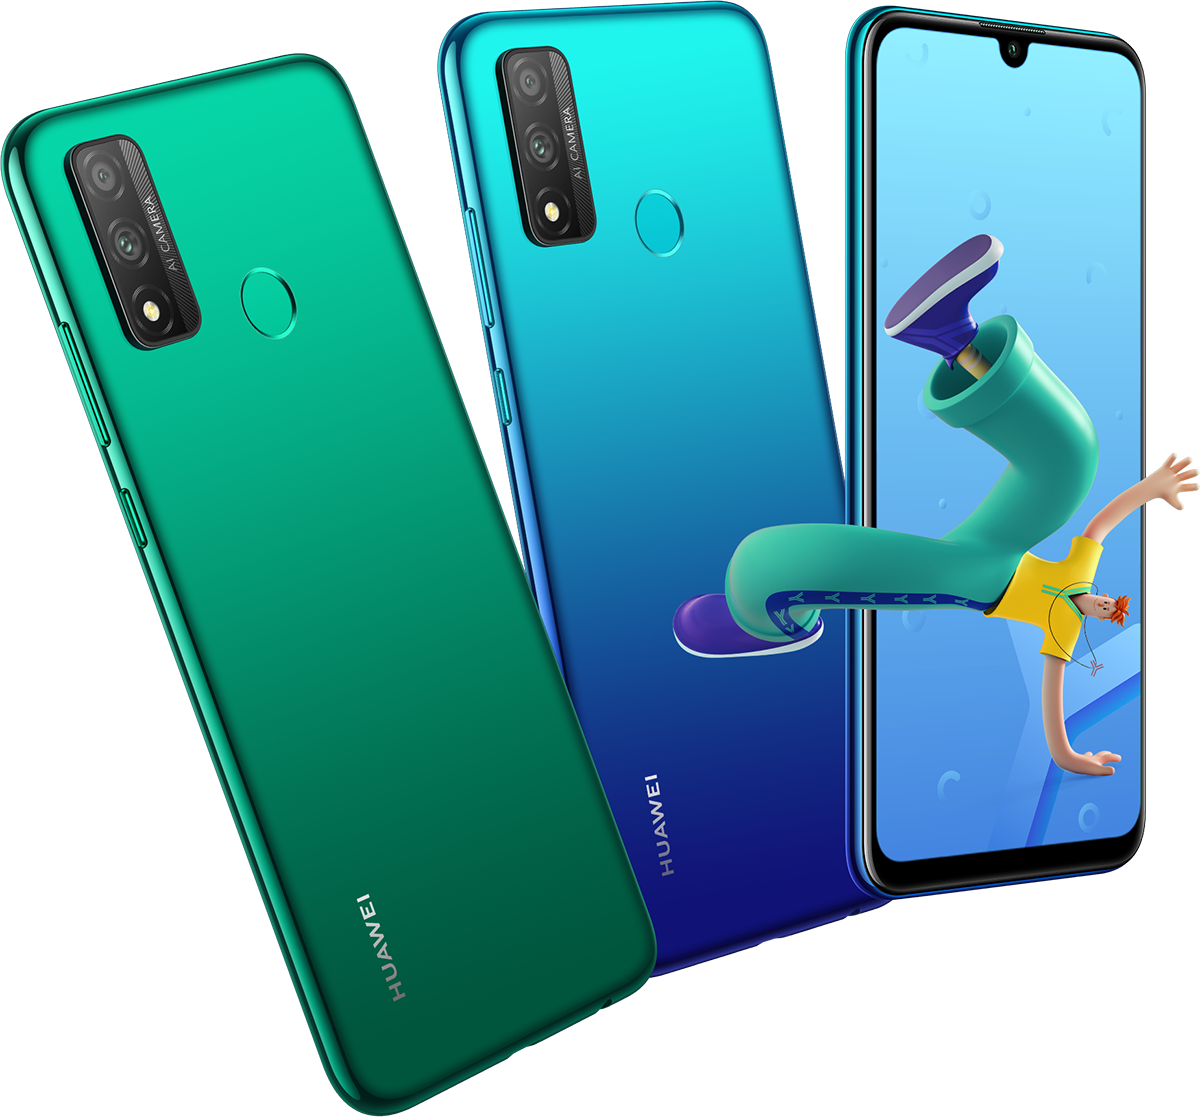 Huawei P Smart 2021 smartphone launched with a 48MP quad rear camera and 5000mAh battery